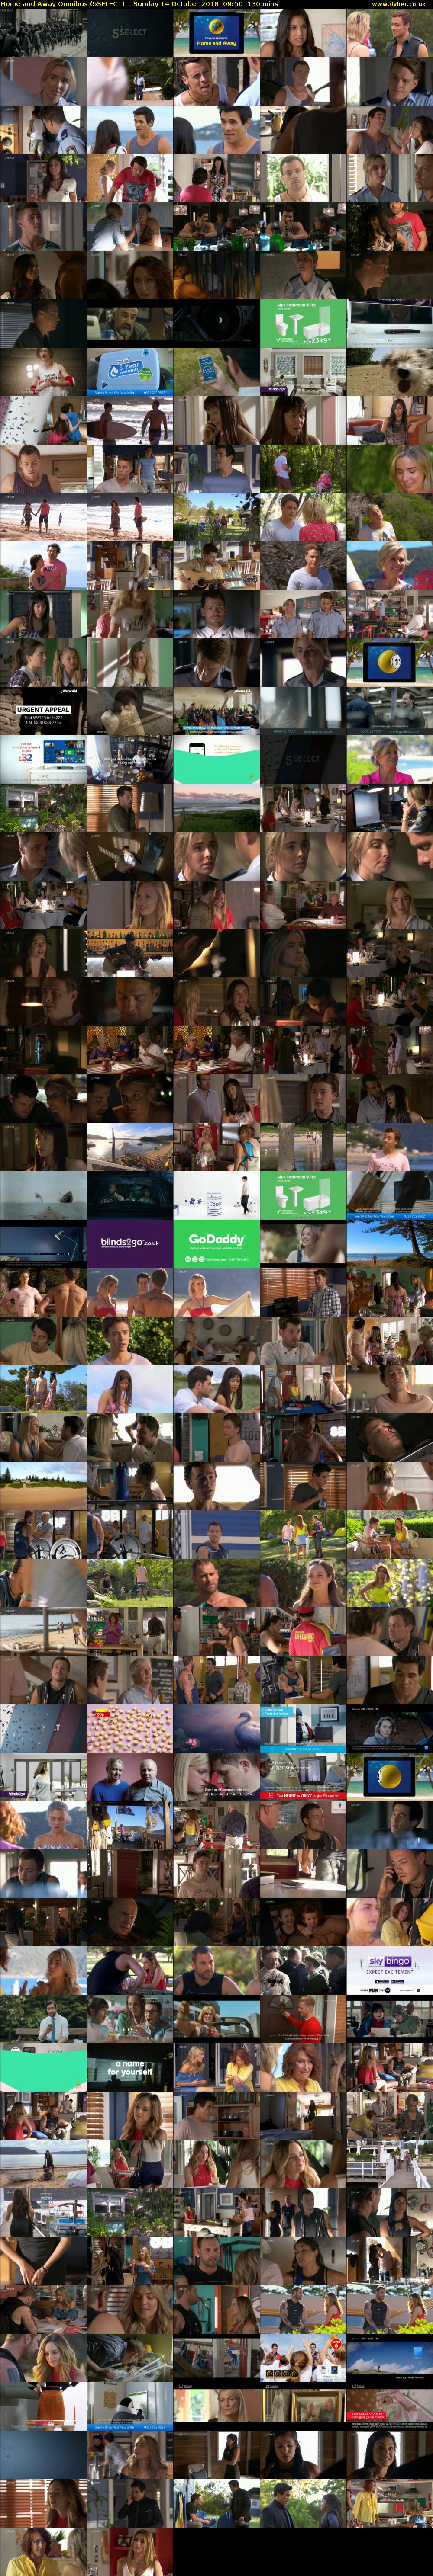 Home and Away Omnibus (5SELECT) Sunday 14 October 2018 09:50 - 12:00